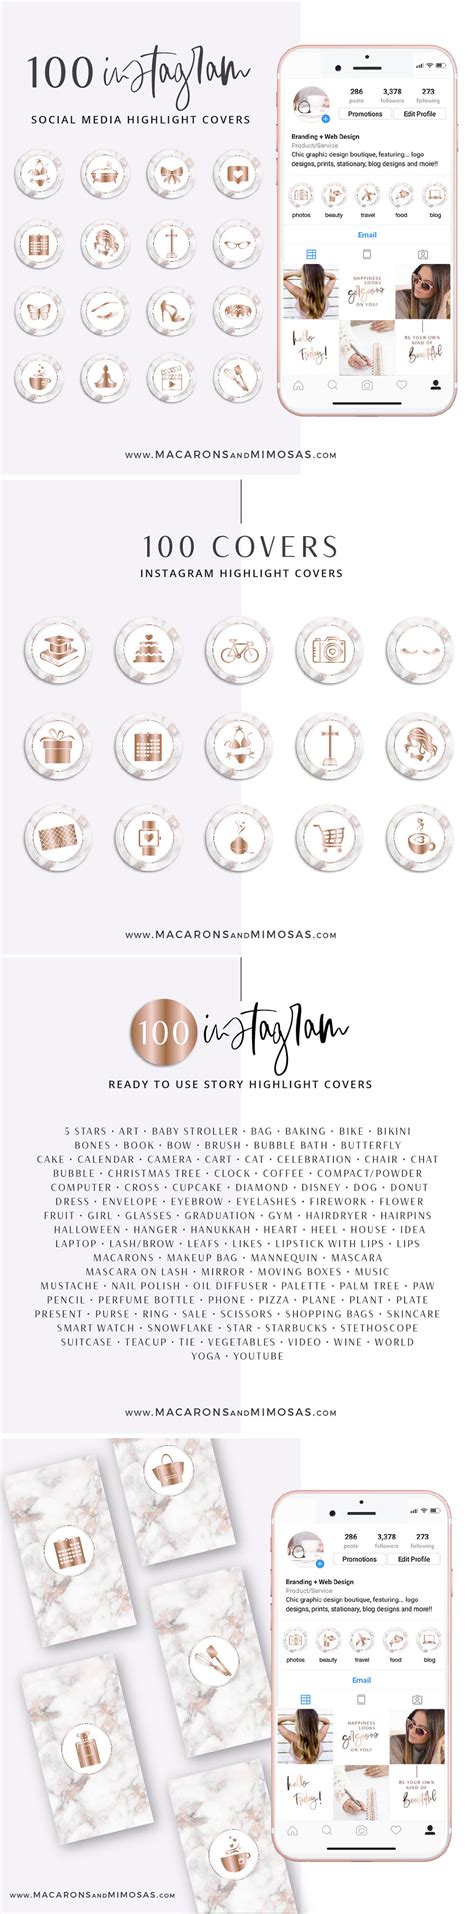 Instagram highlight covers make a great first impression. Rose Gold Marble Highlight Covers • Macarons and Mimosas